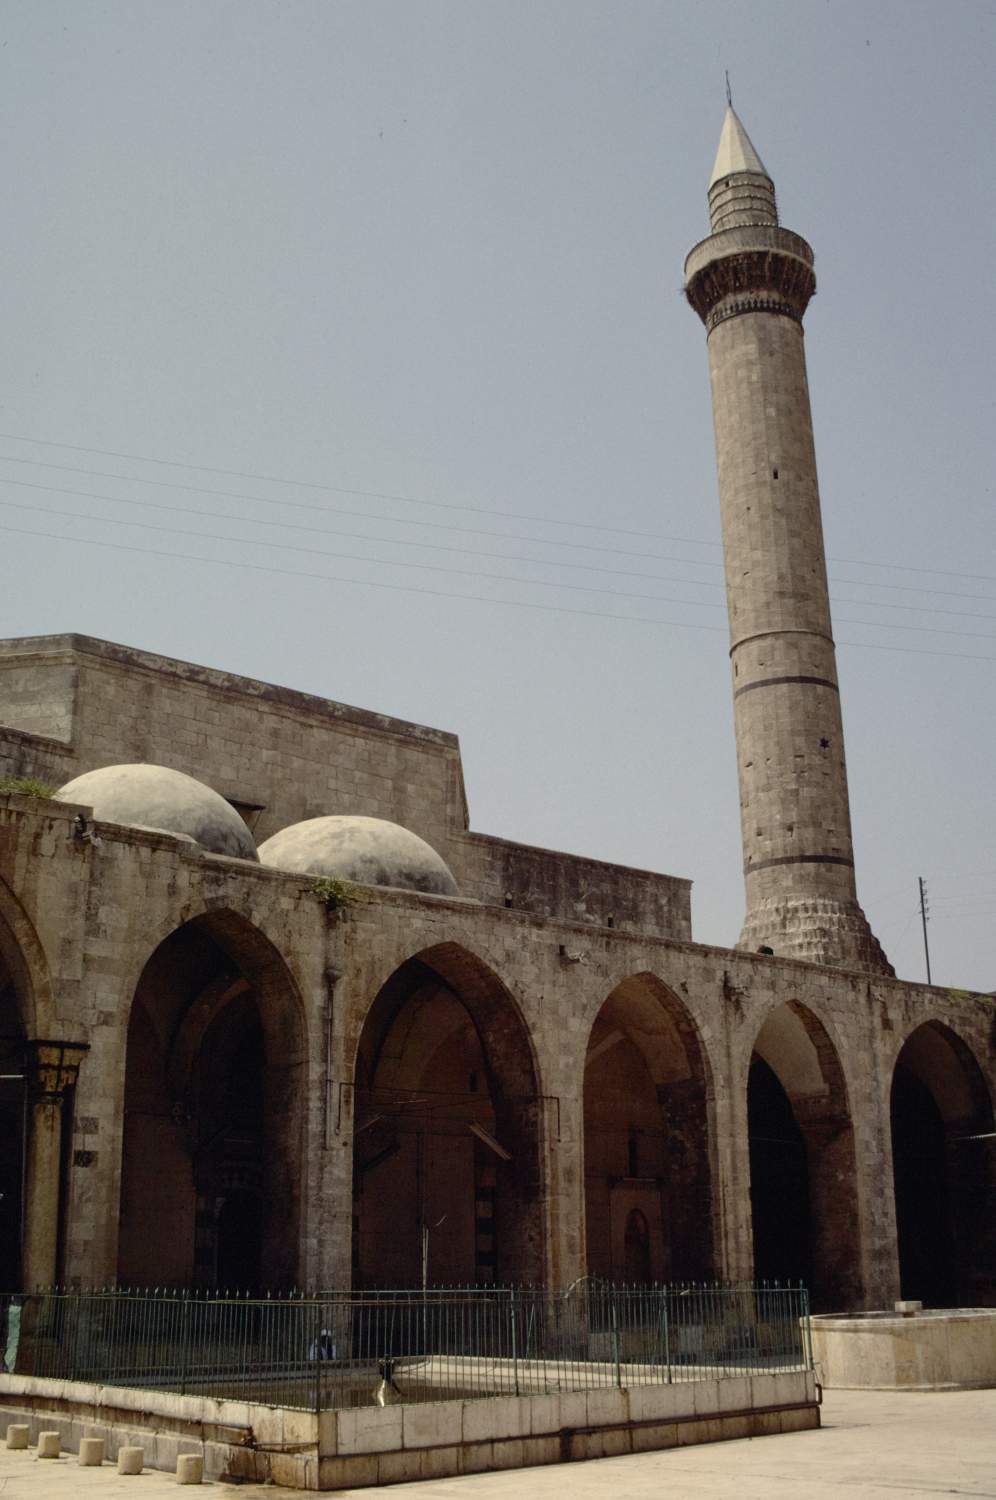 View of entrance portico and minaret.